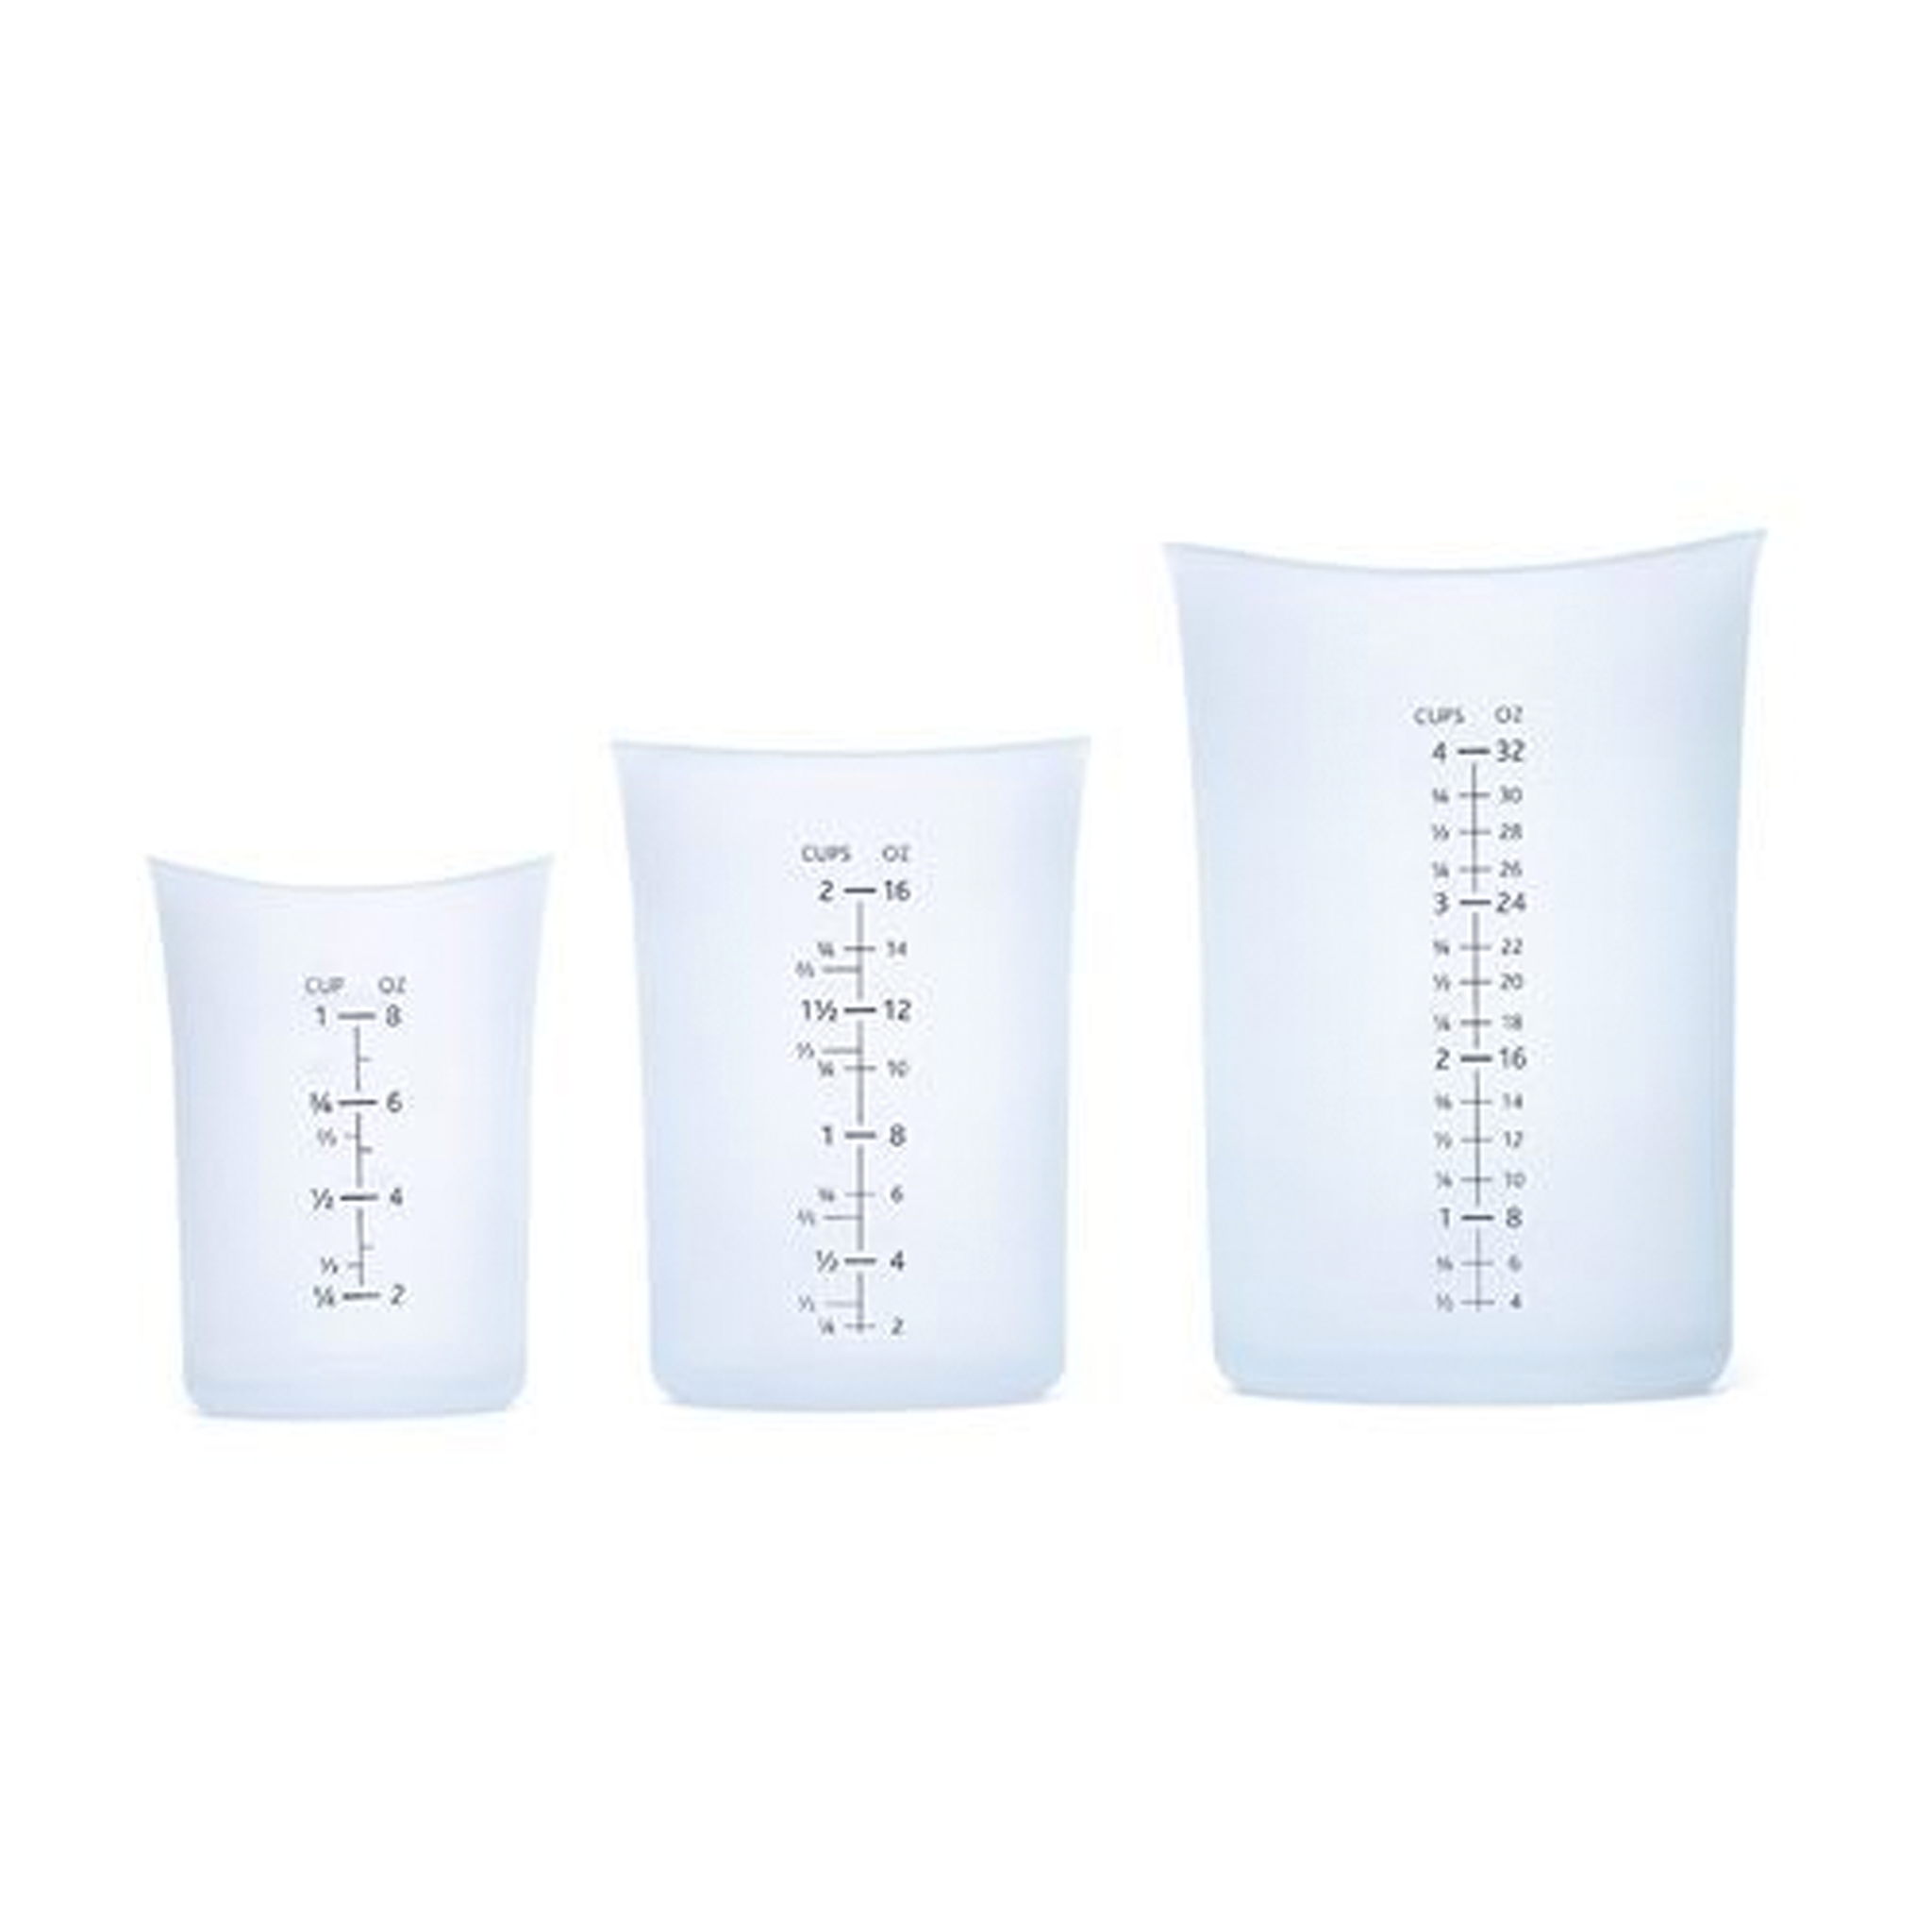 Silicone Measuring Cup by Celebrate It®